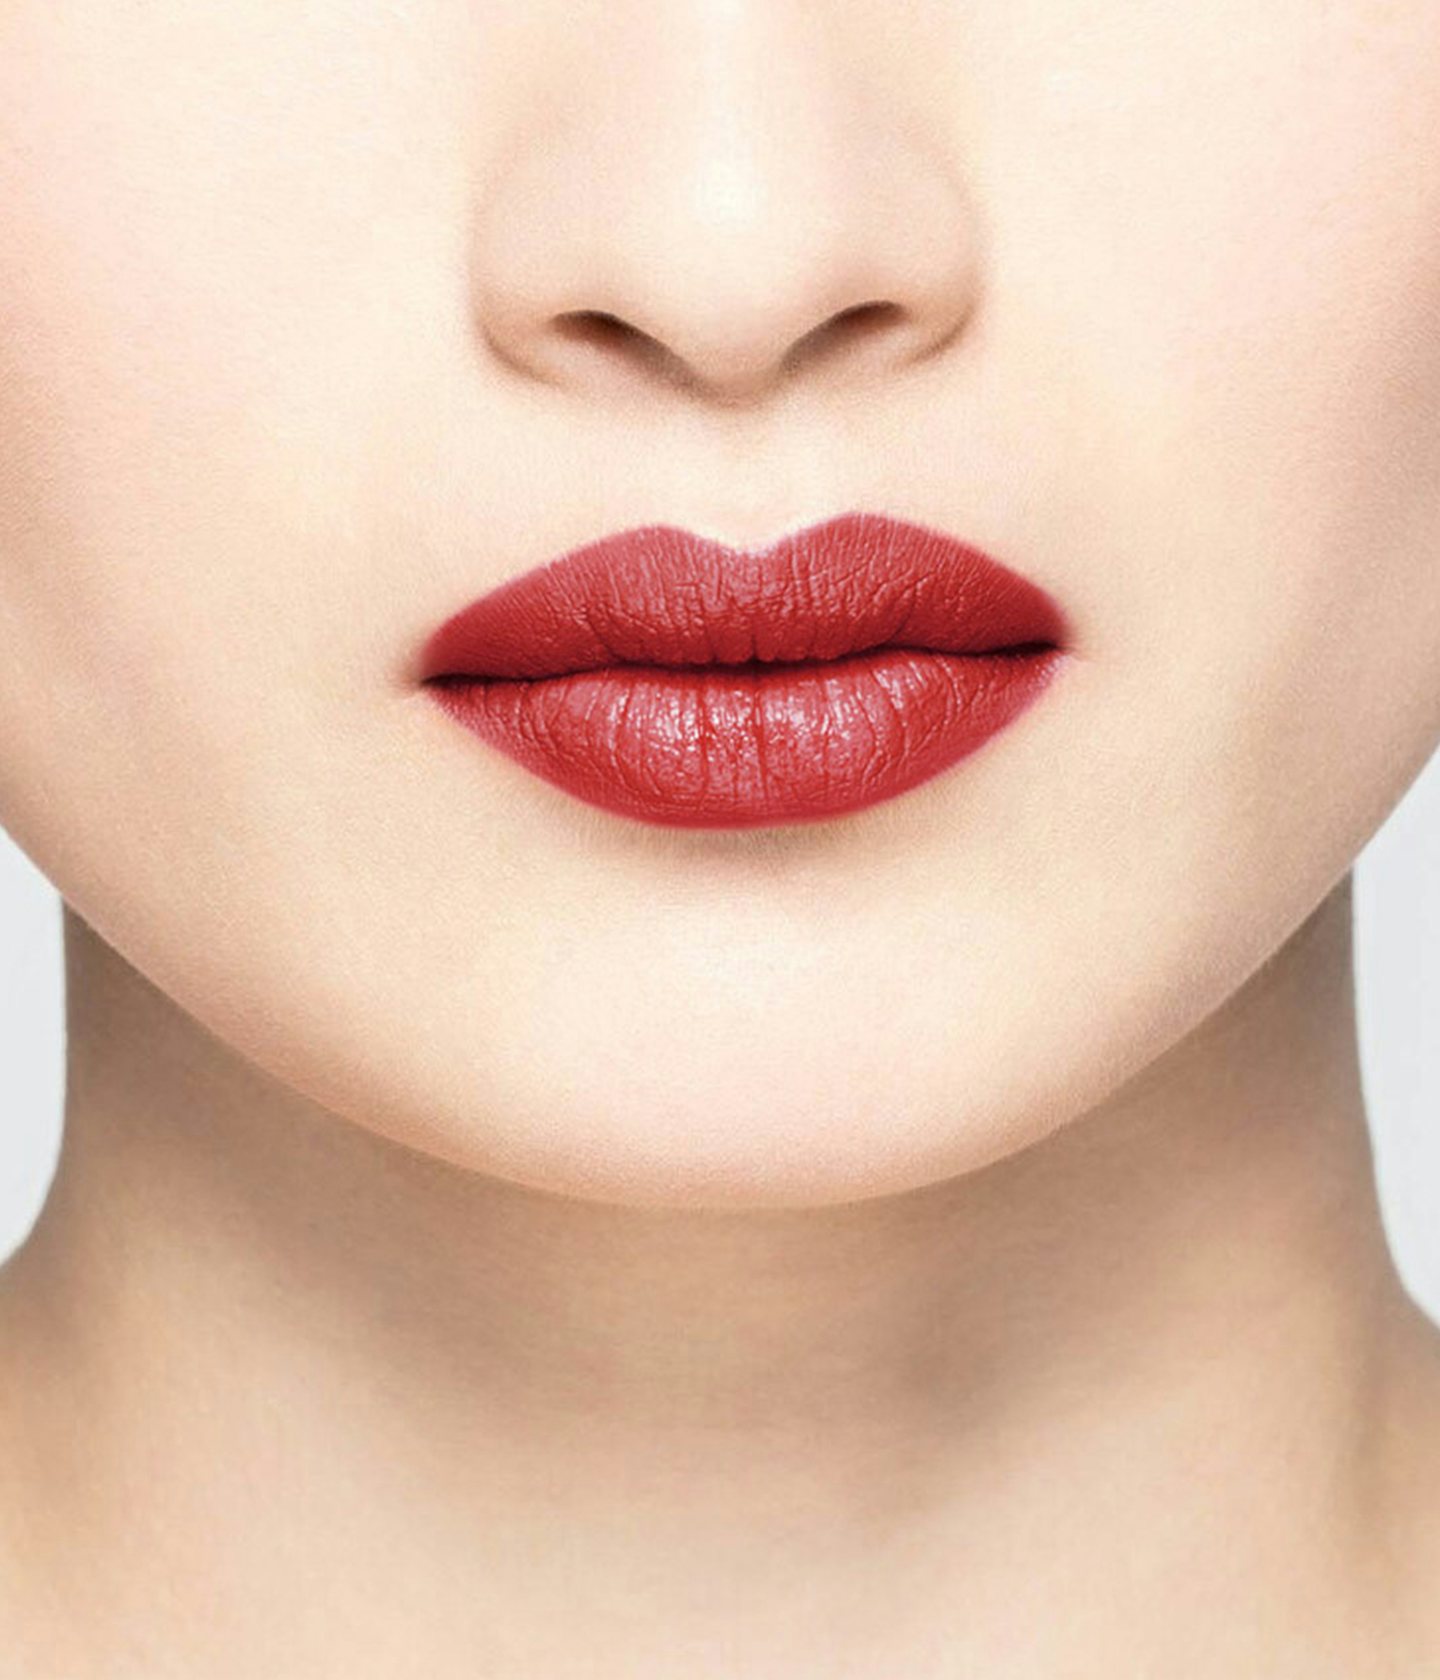 La bouche rouge SW1X lipstick shade on the lips of an Asian model